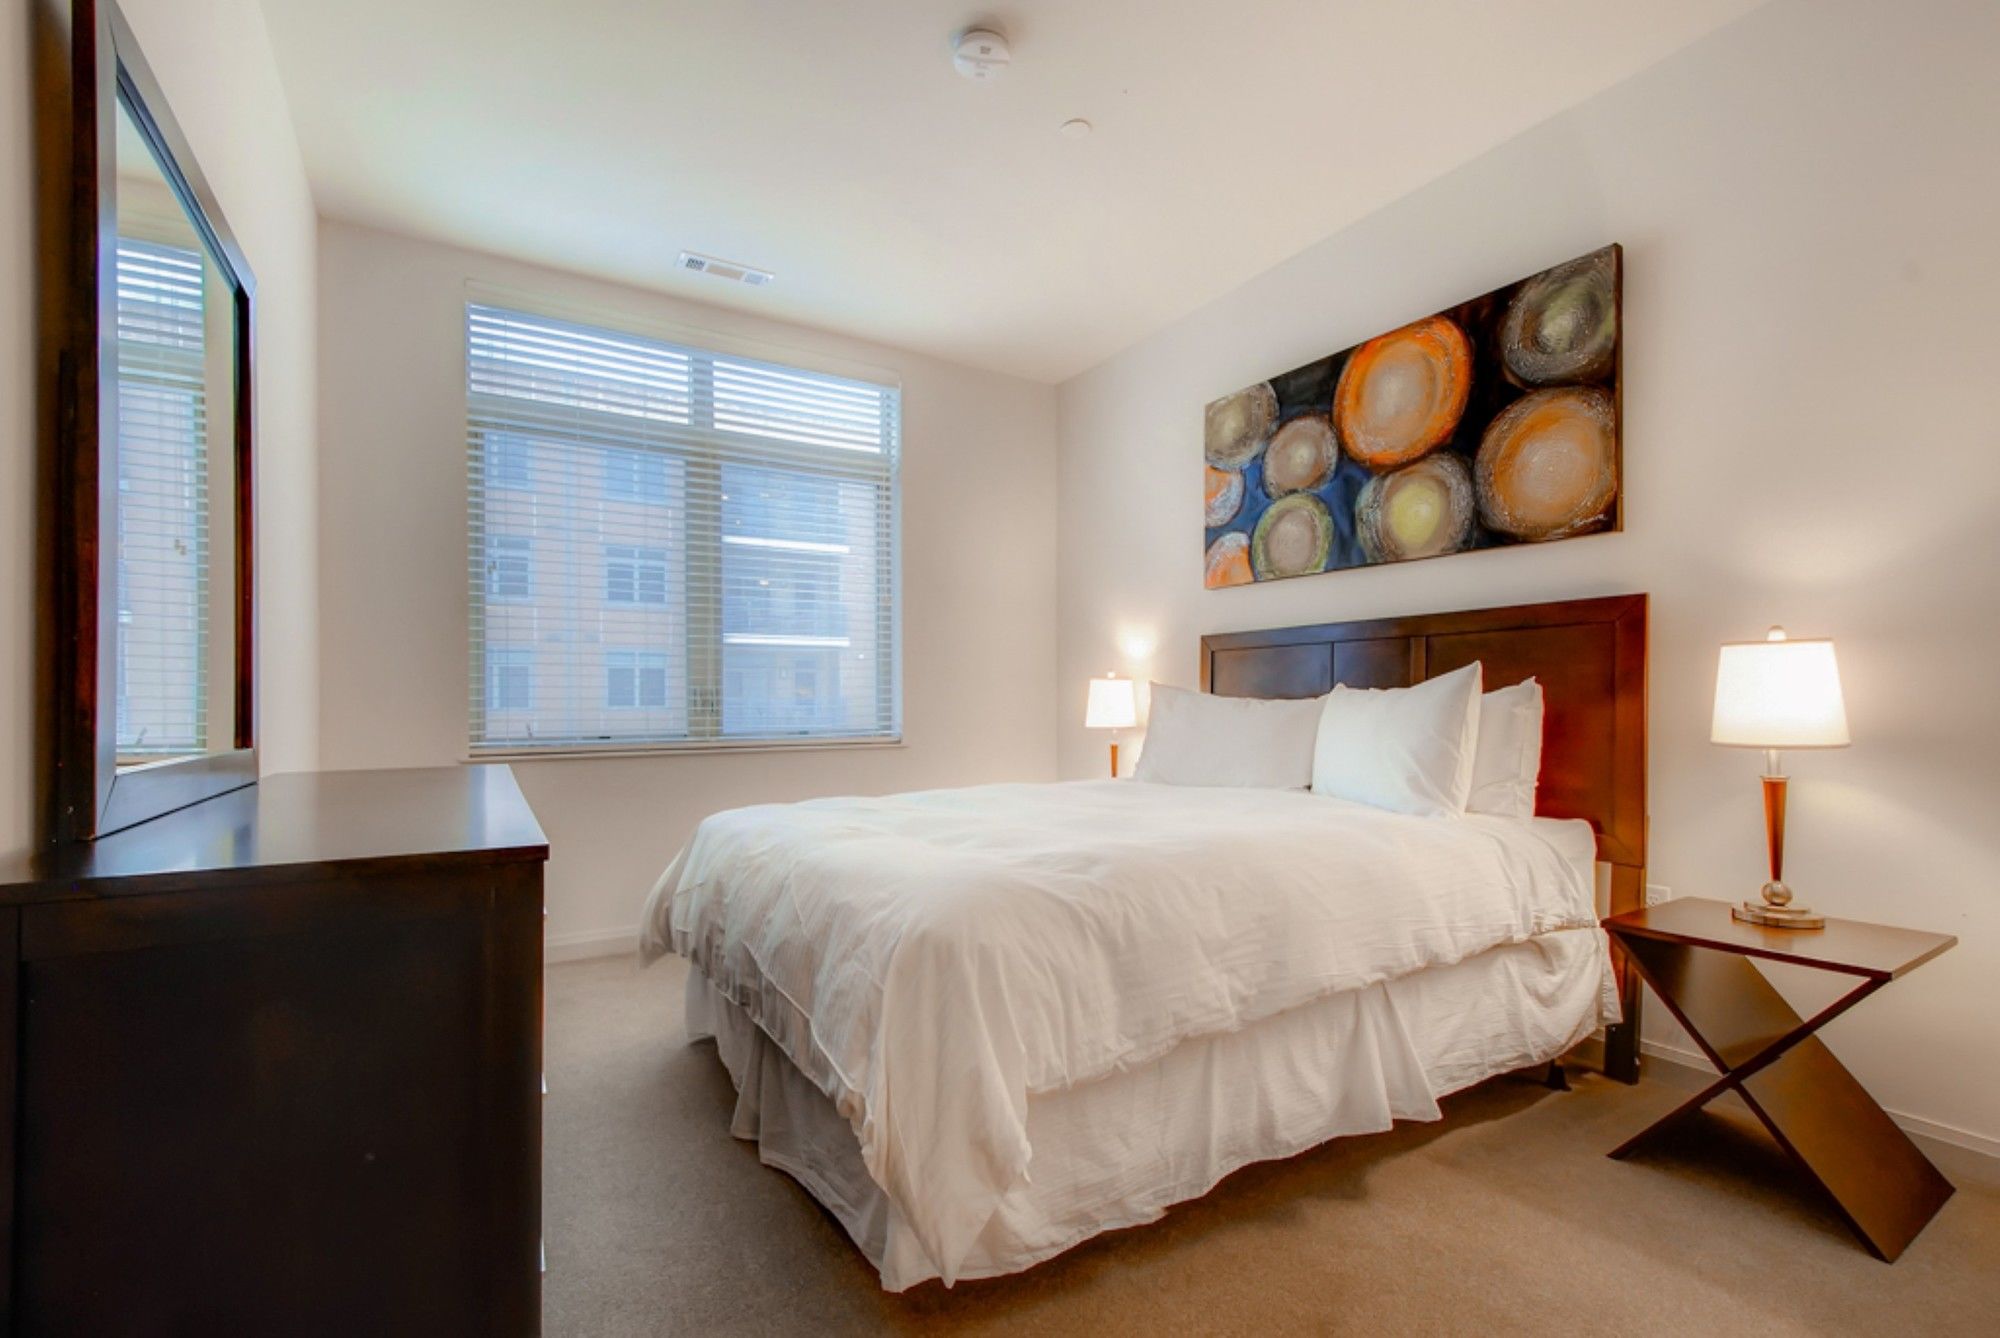 Global Luxury Suites At The Charles River